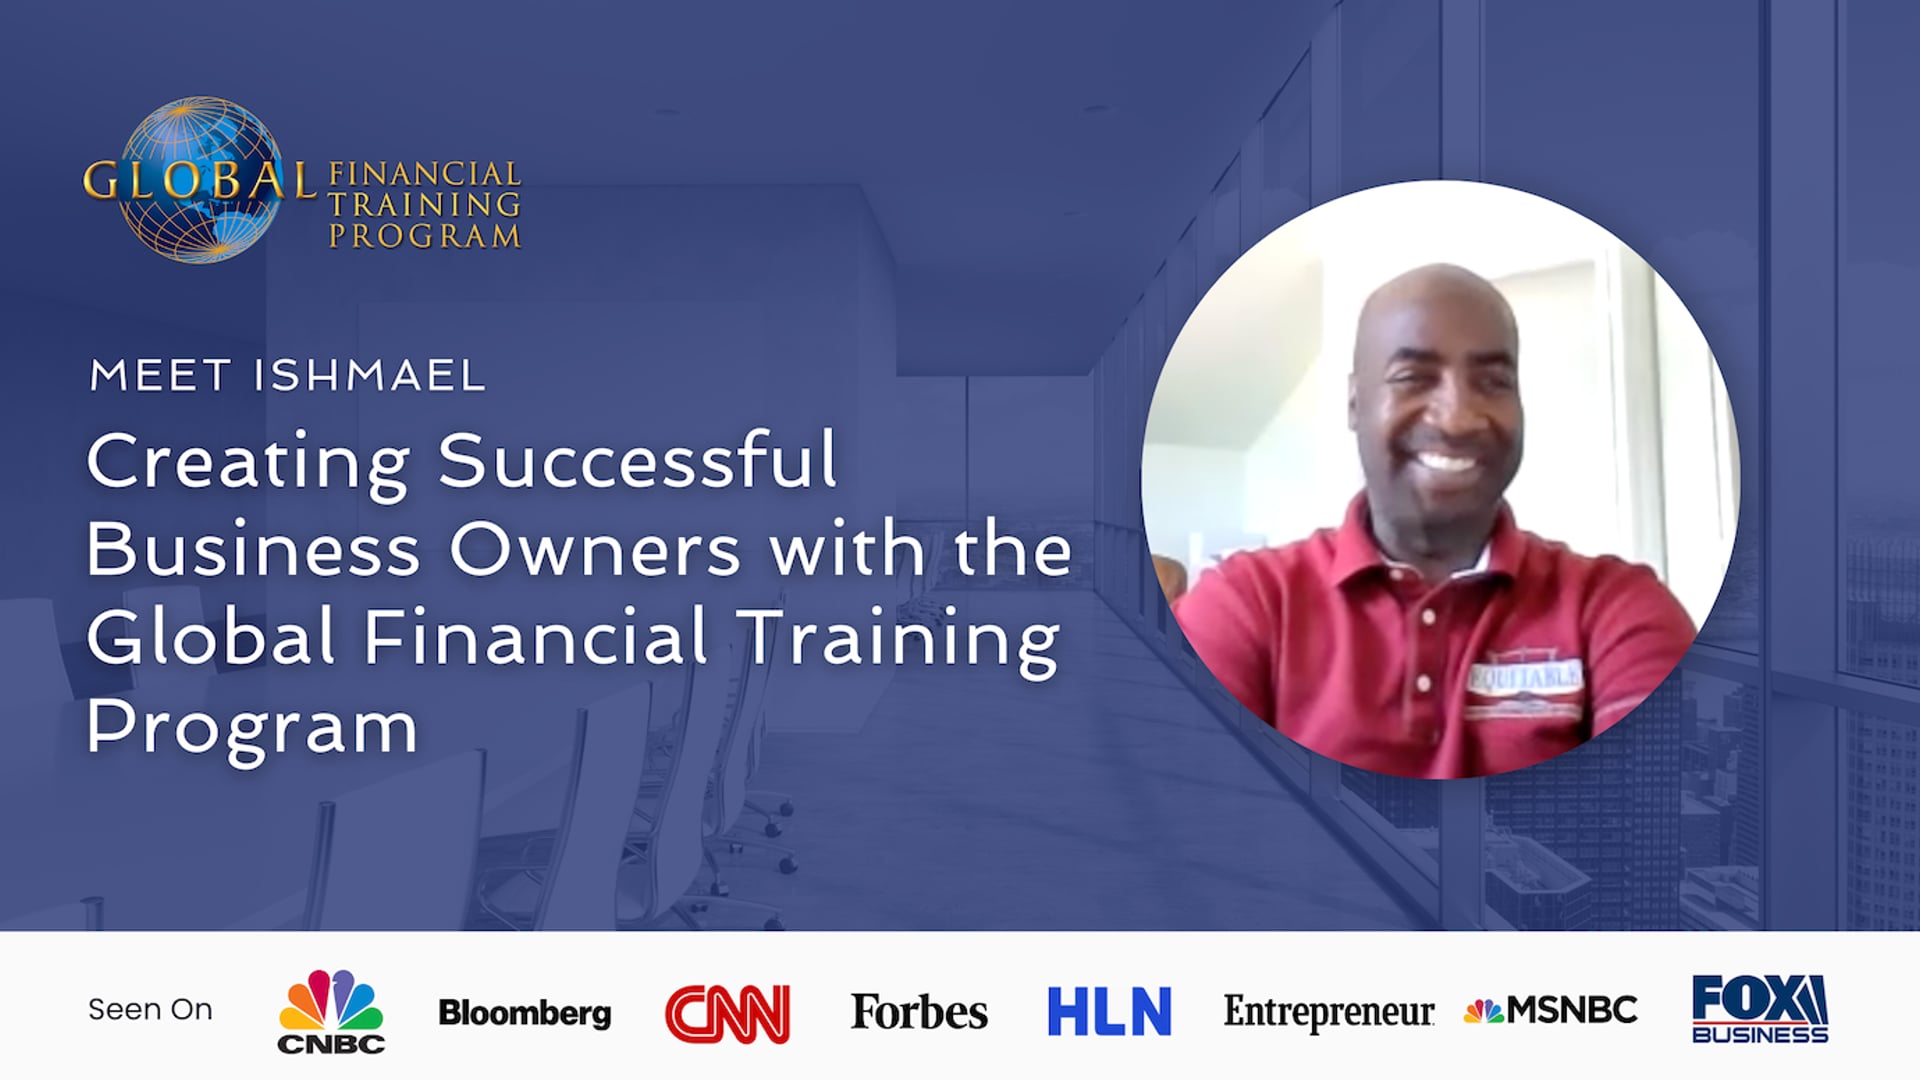 Global Financial Training Program Interview with Ishmael